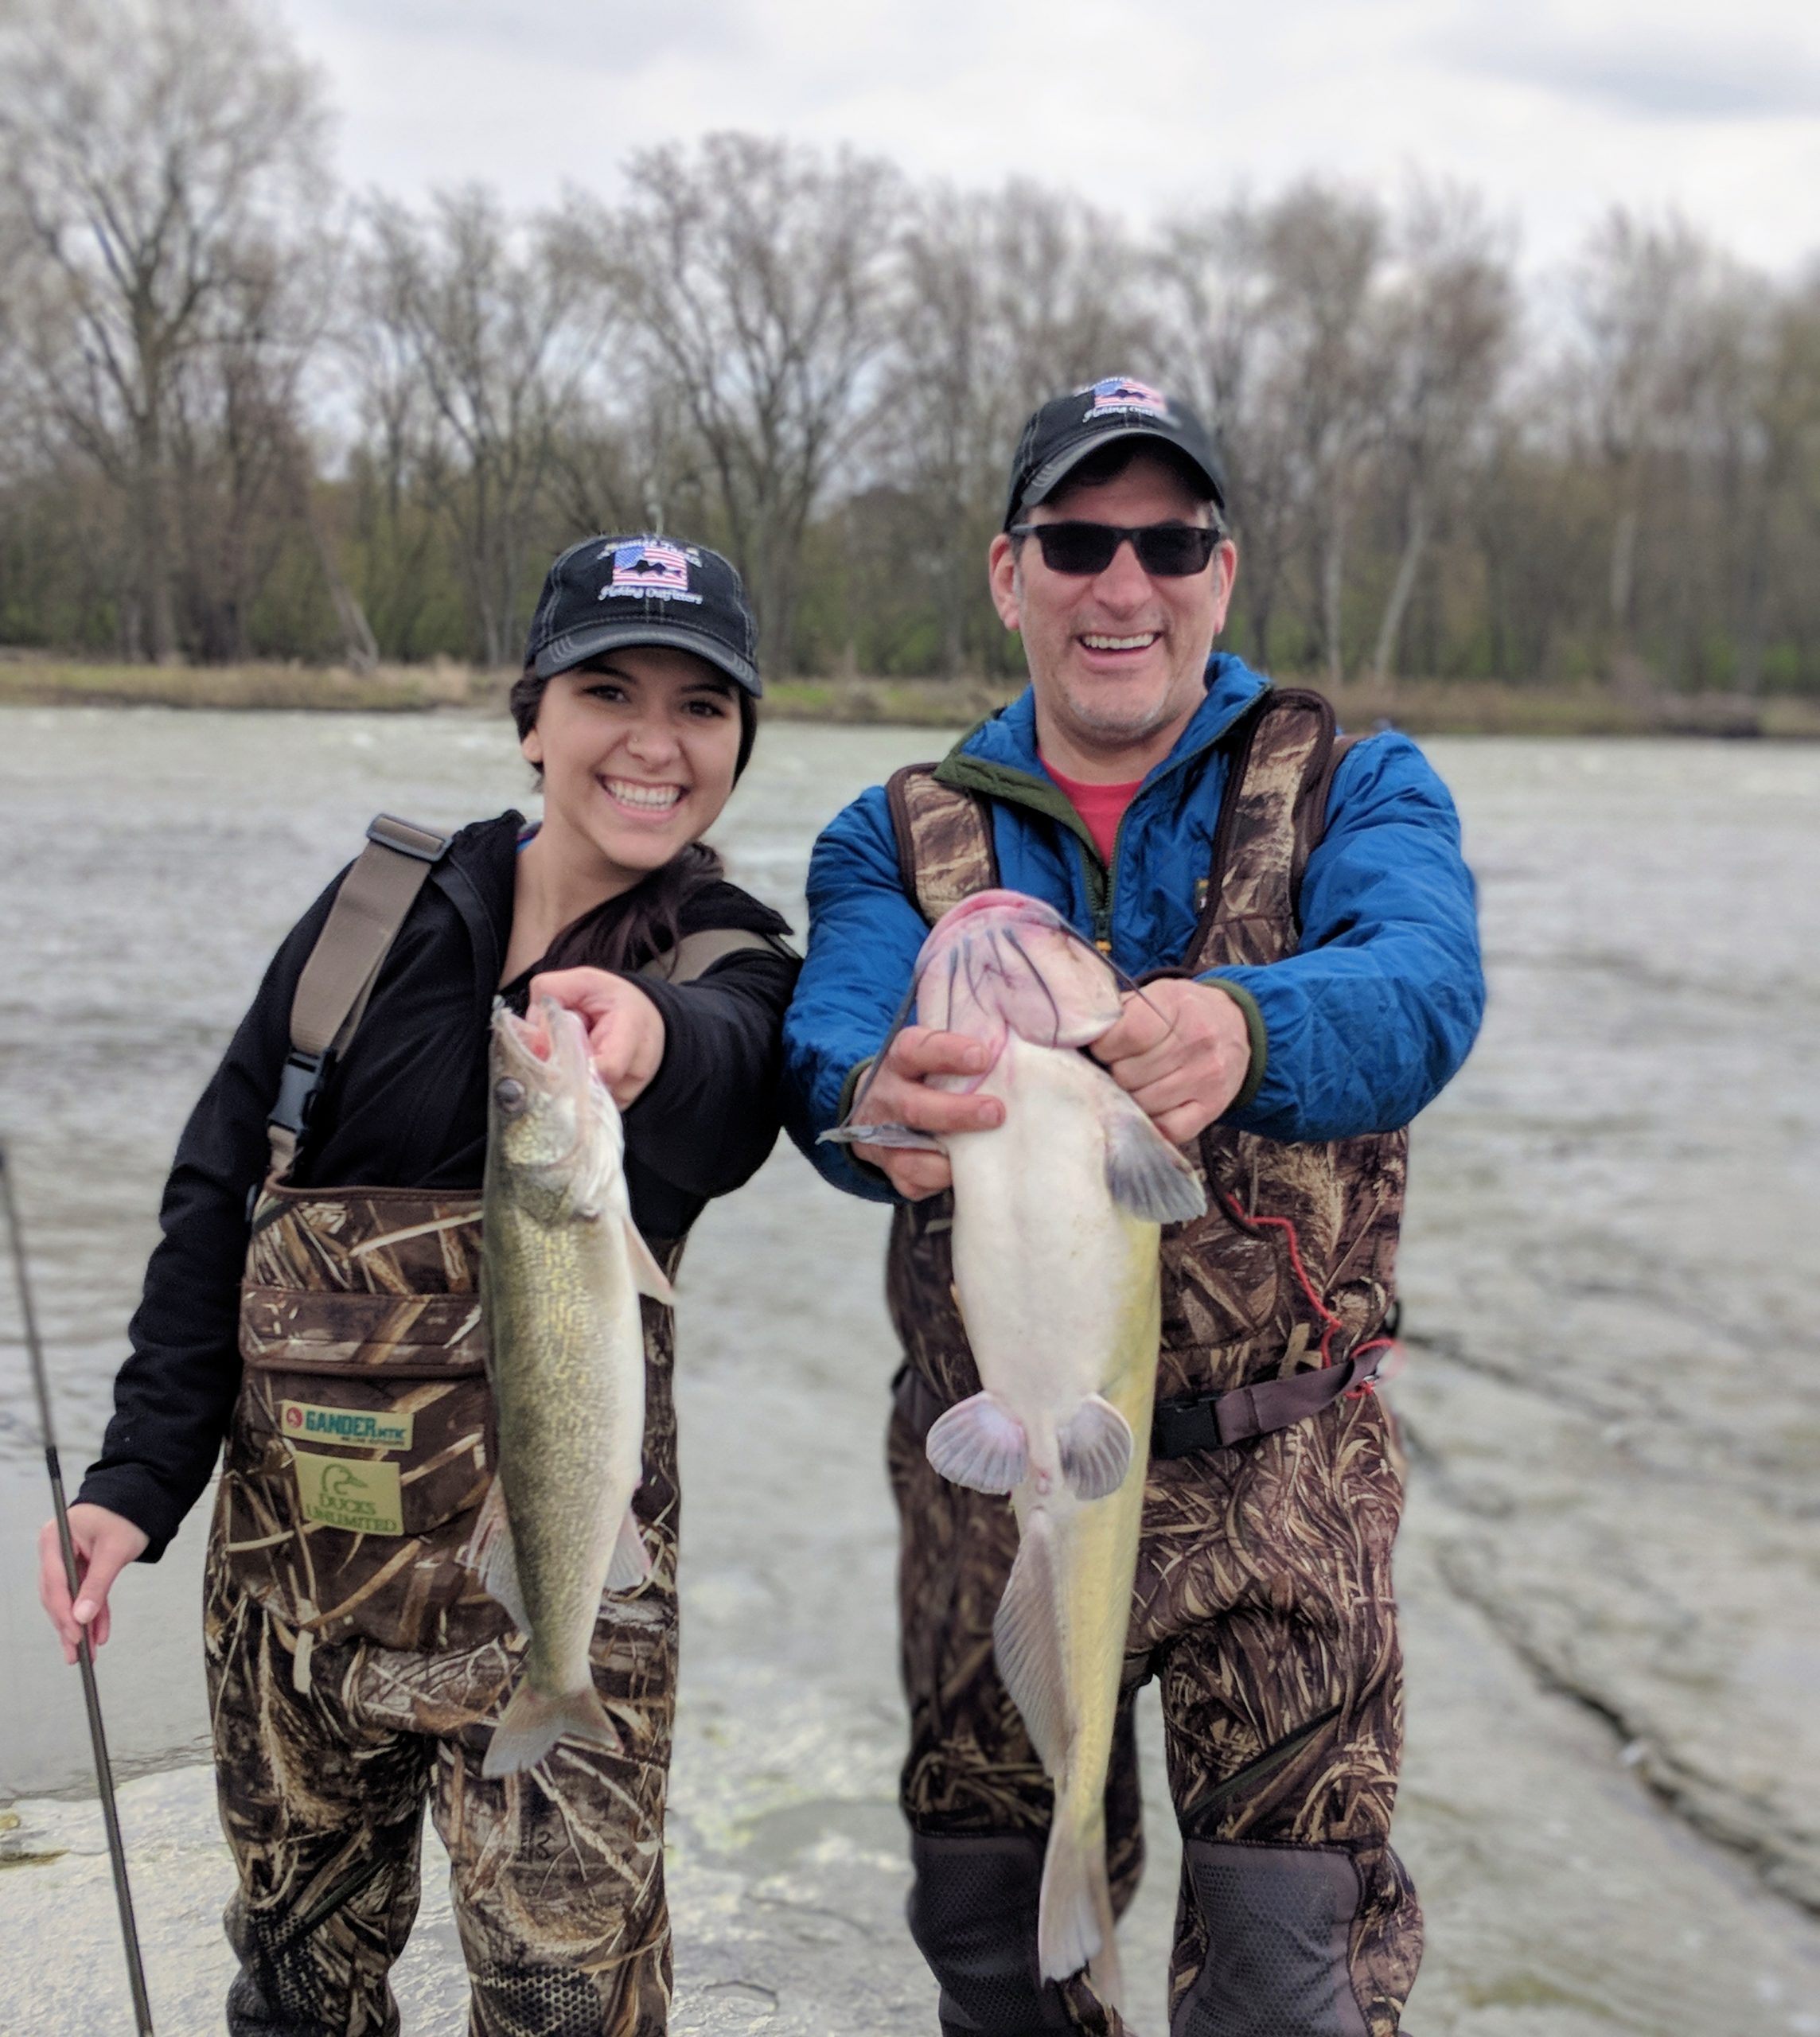 Maumee river report- 13 May 2020